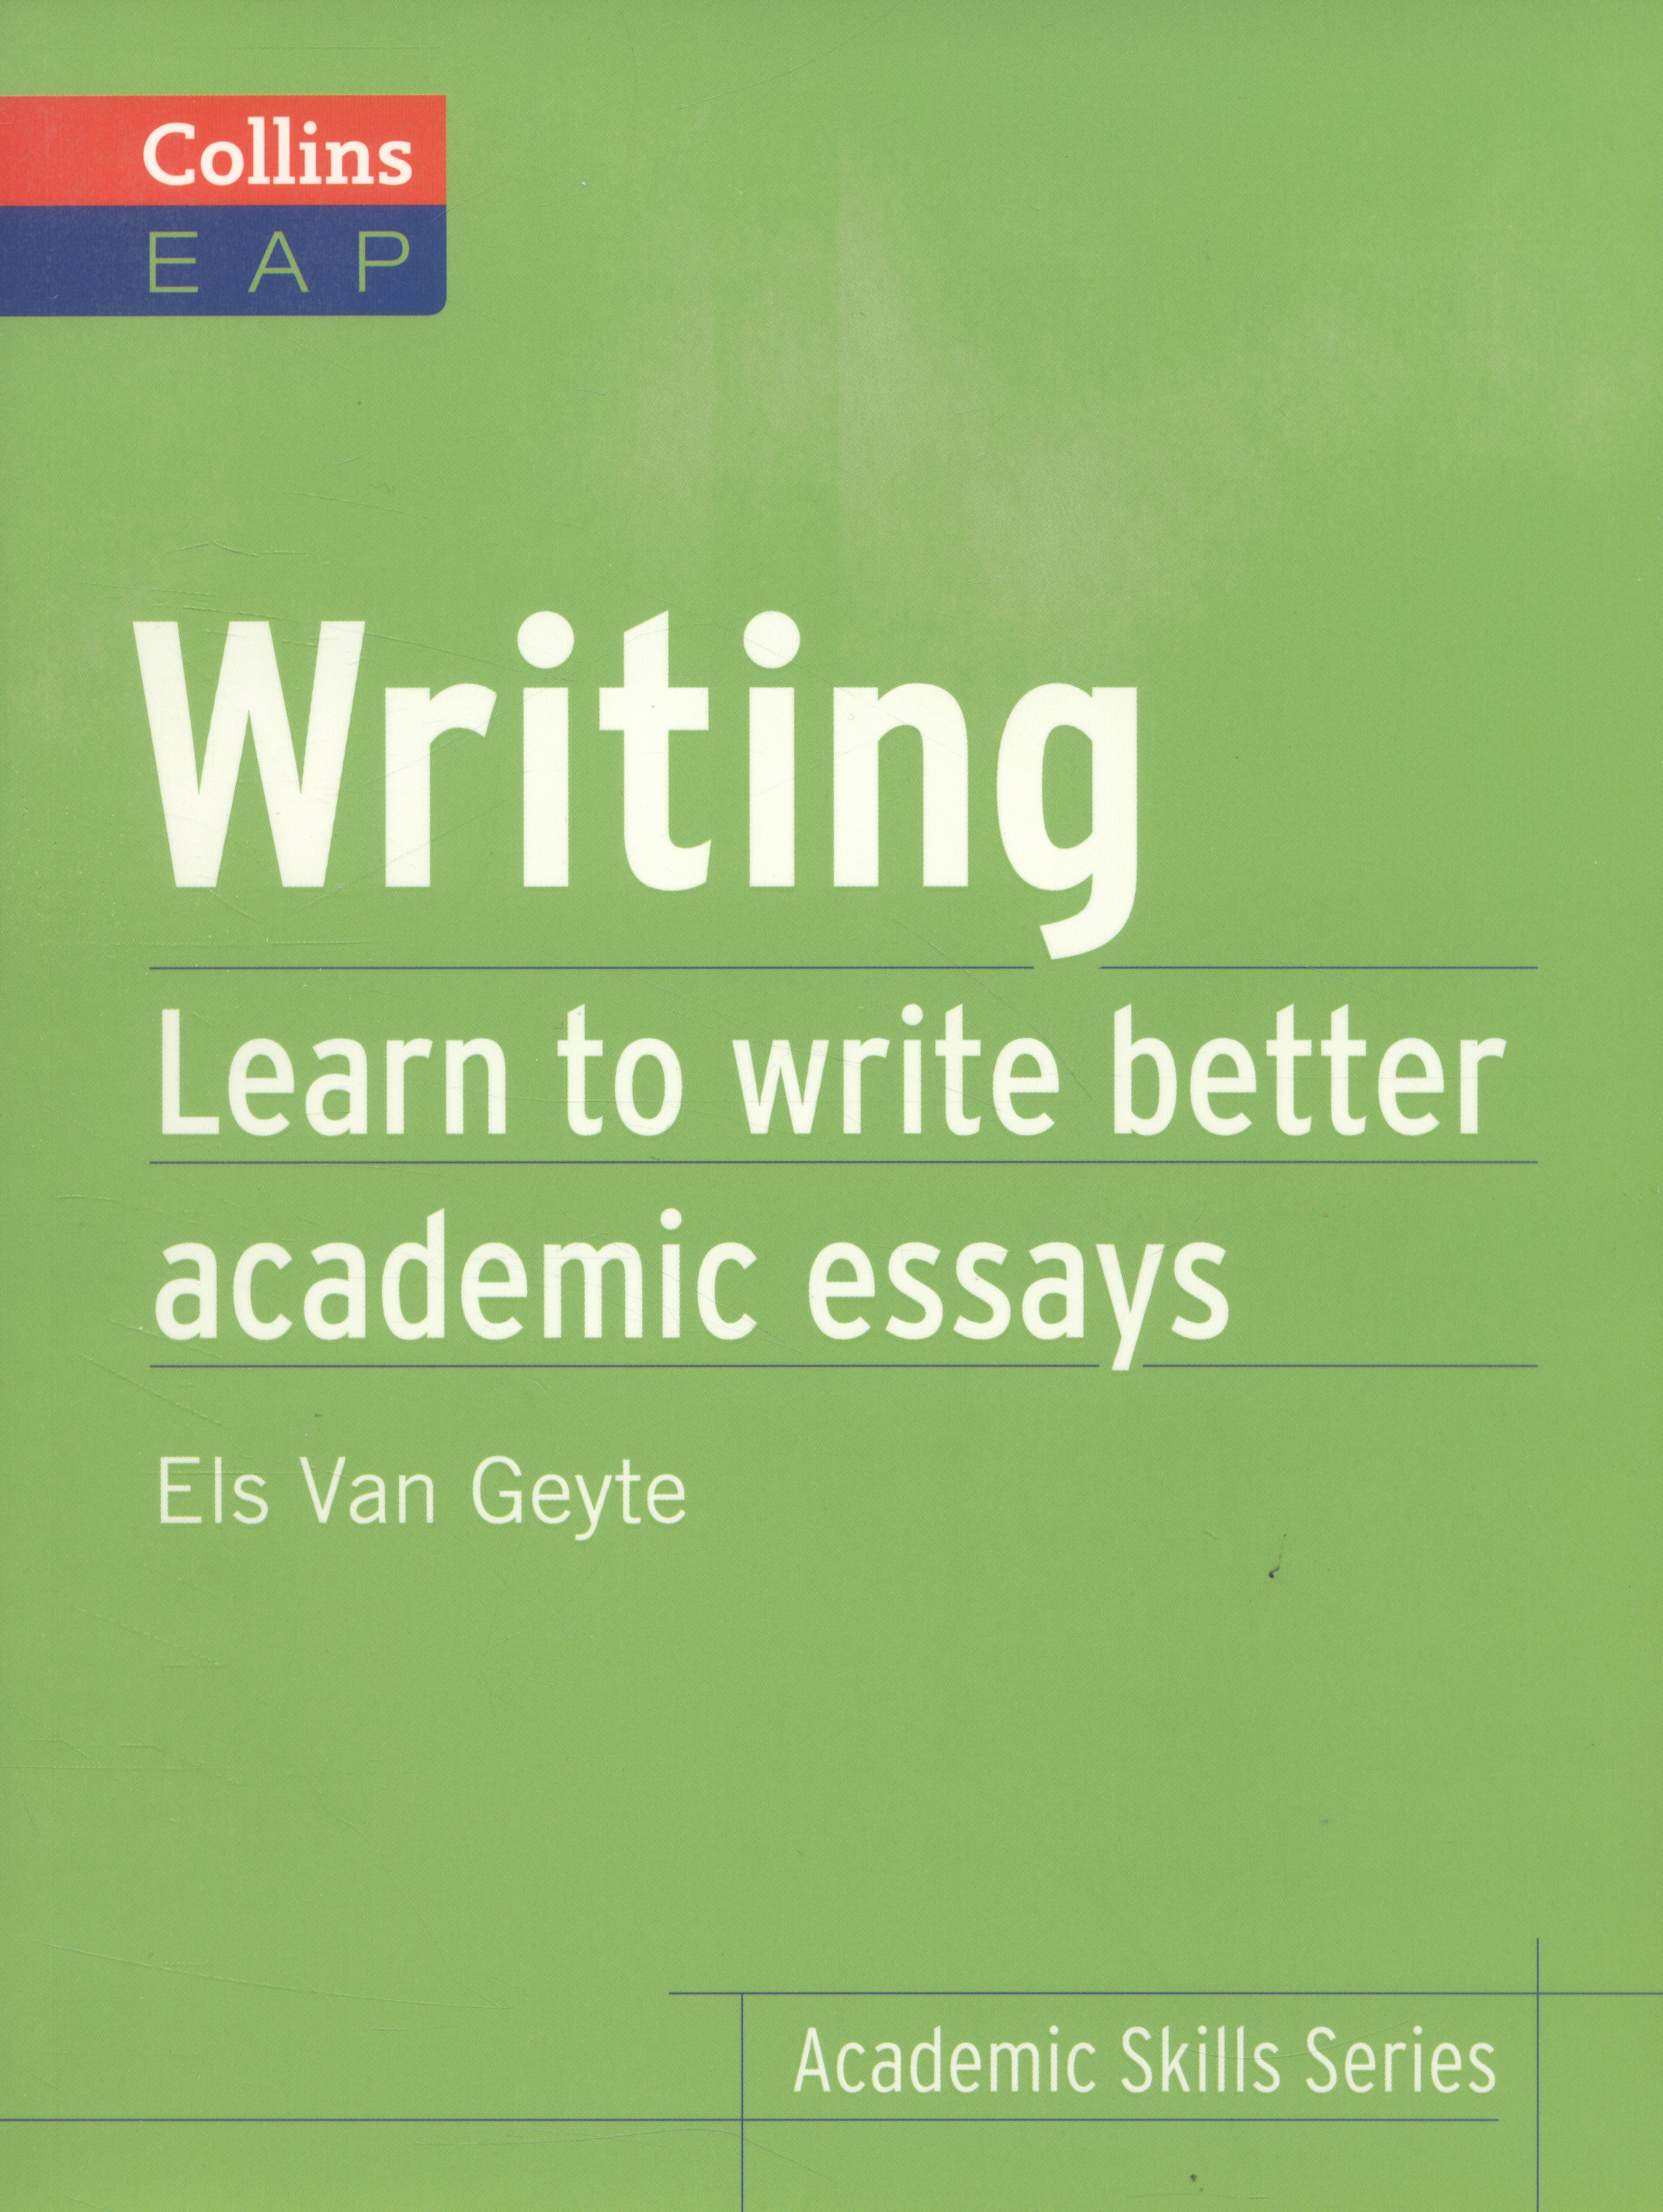 essay books about writing